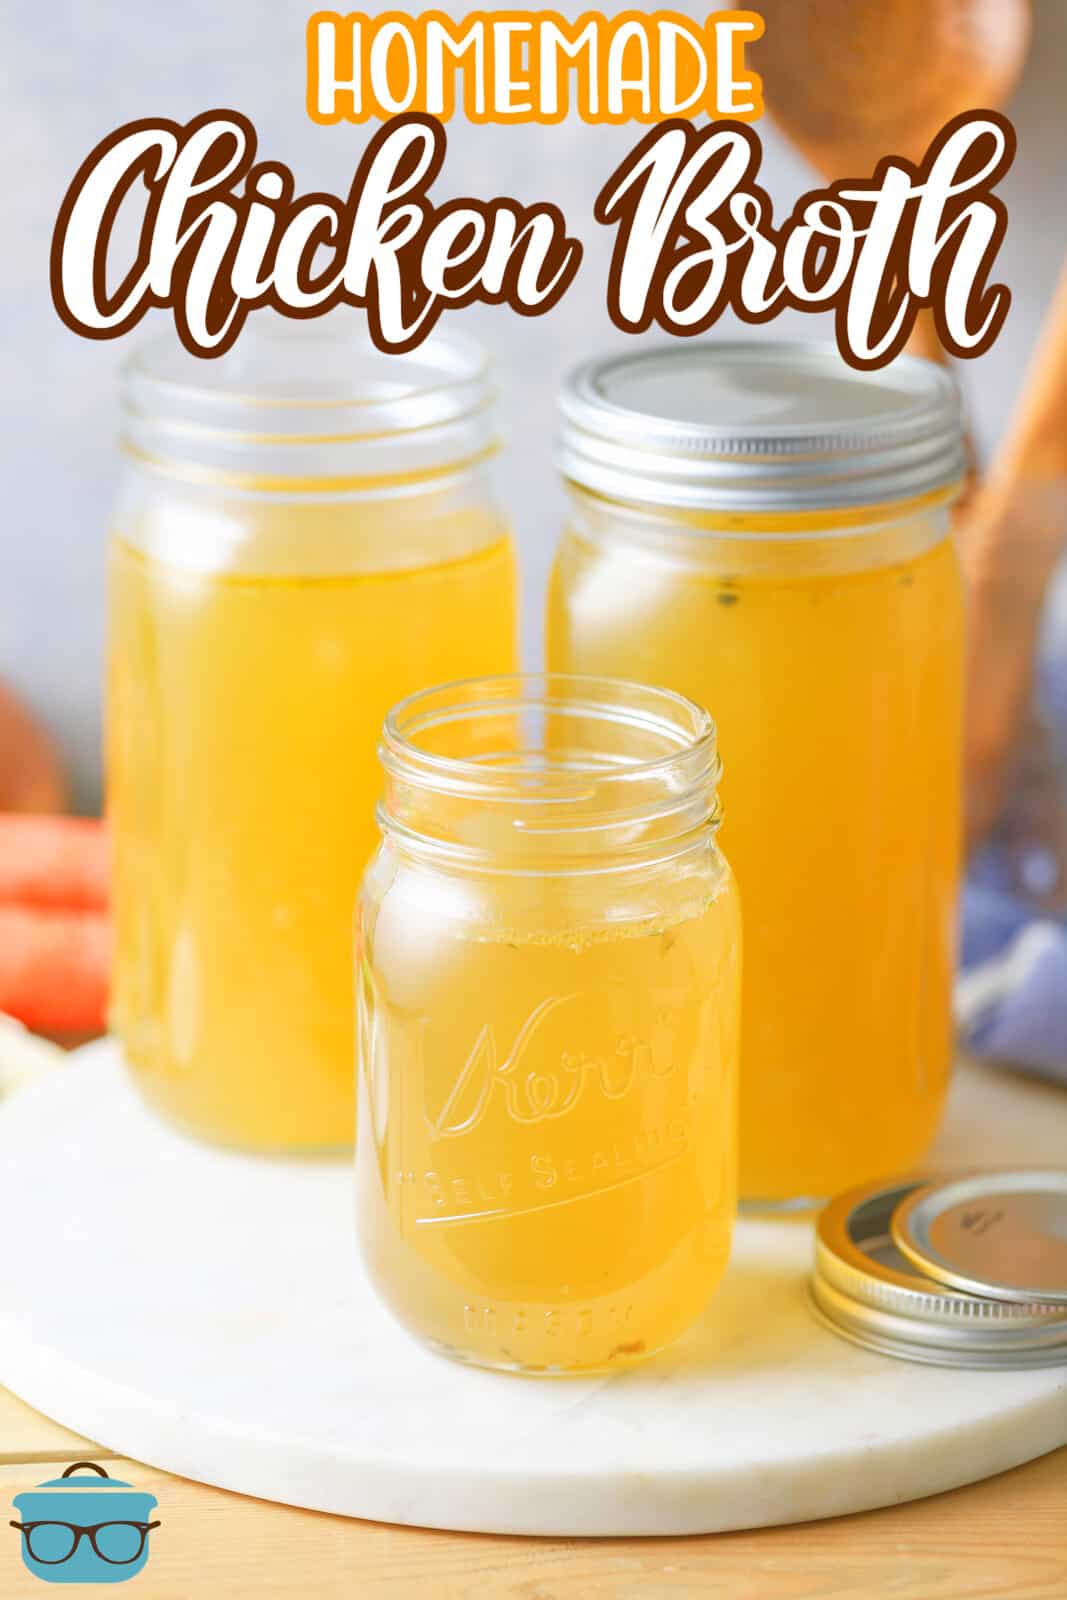 Pinterest image of Homemade Chicken Broth in different sized mason jars 2 with lids off.